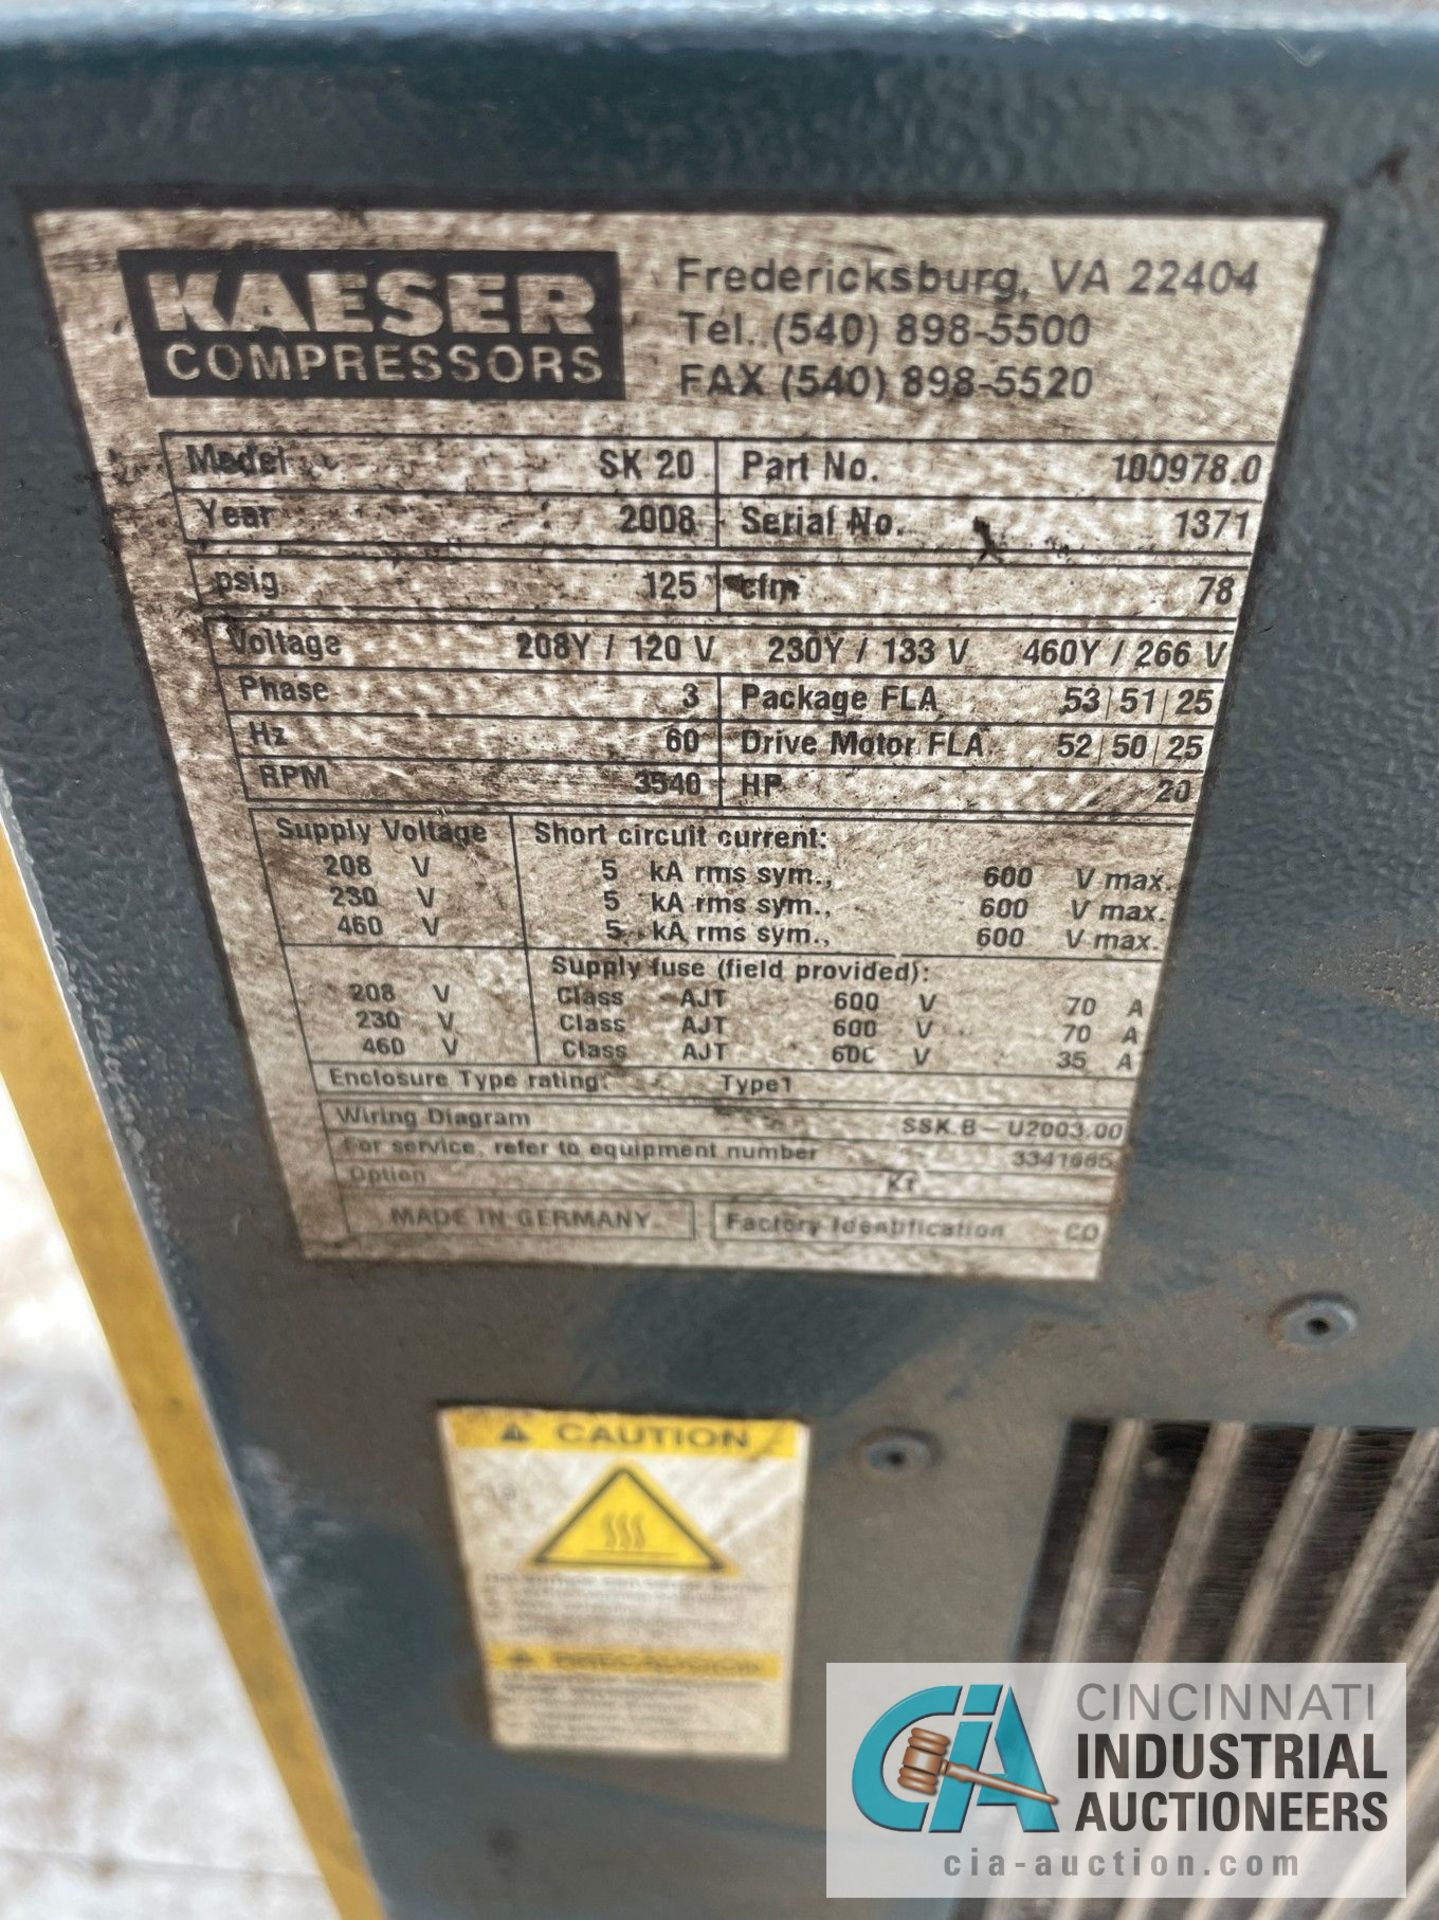 20 HP KAESER MODEL SK-20 AIR COMPRESSOR; S/N 1371 (NEW 2008), CONDITION UNKNOWN, WAS IN PLACE HOOKED - Image 2 of 4